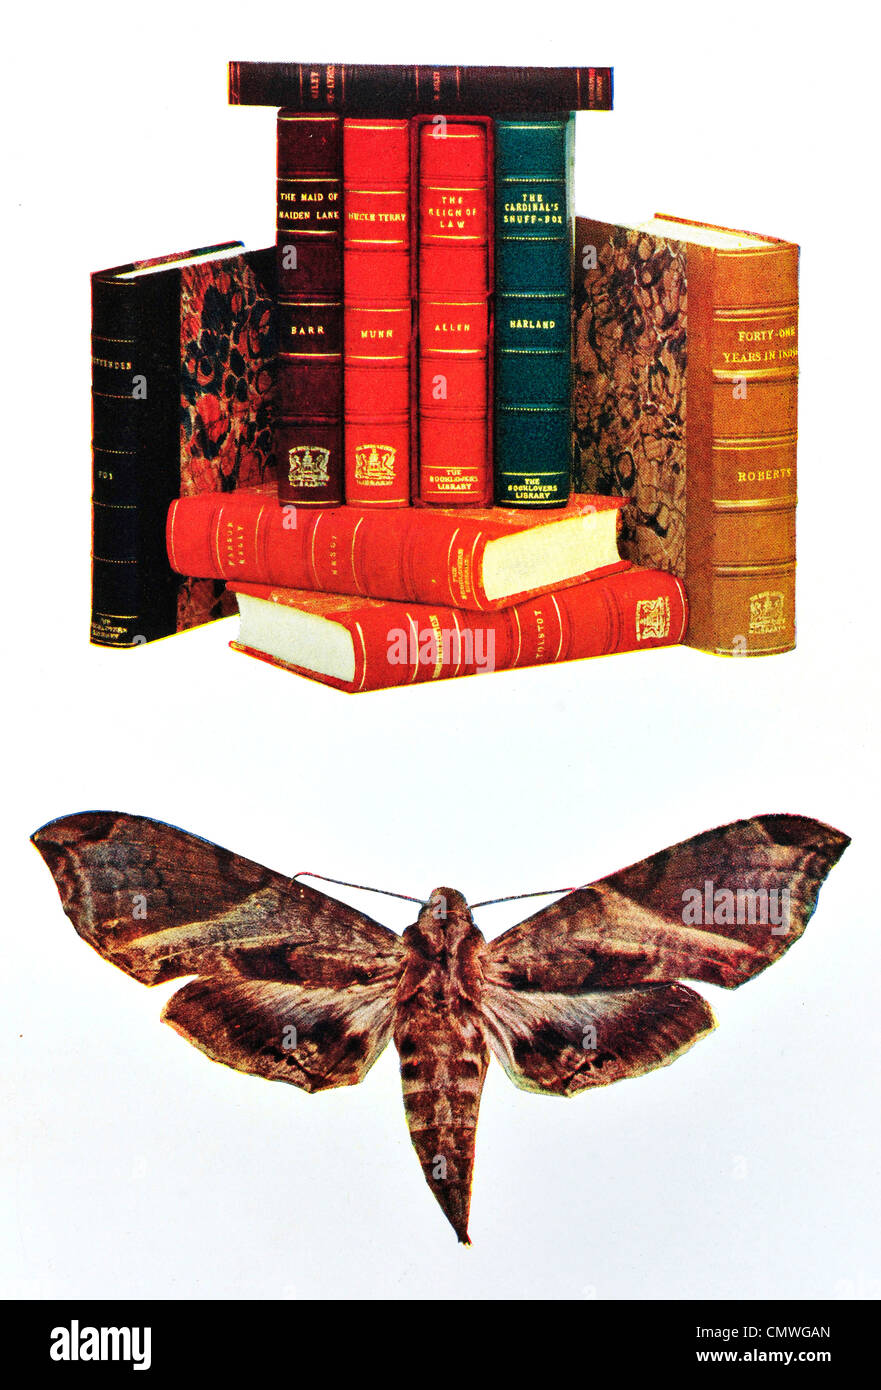 moth fly book books literature hard back cover Stock Photo